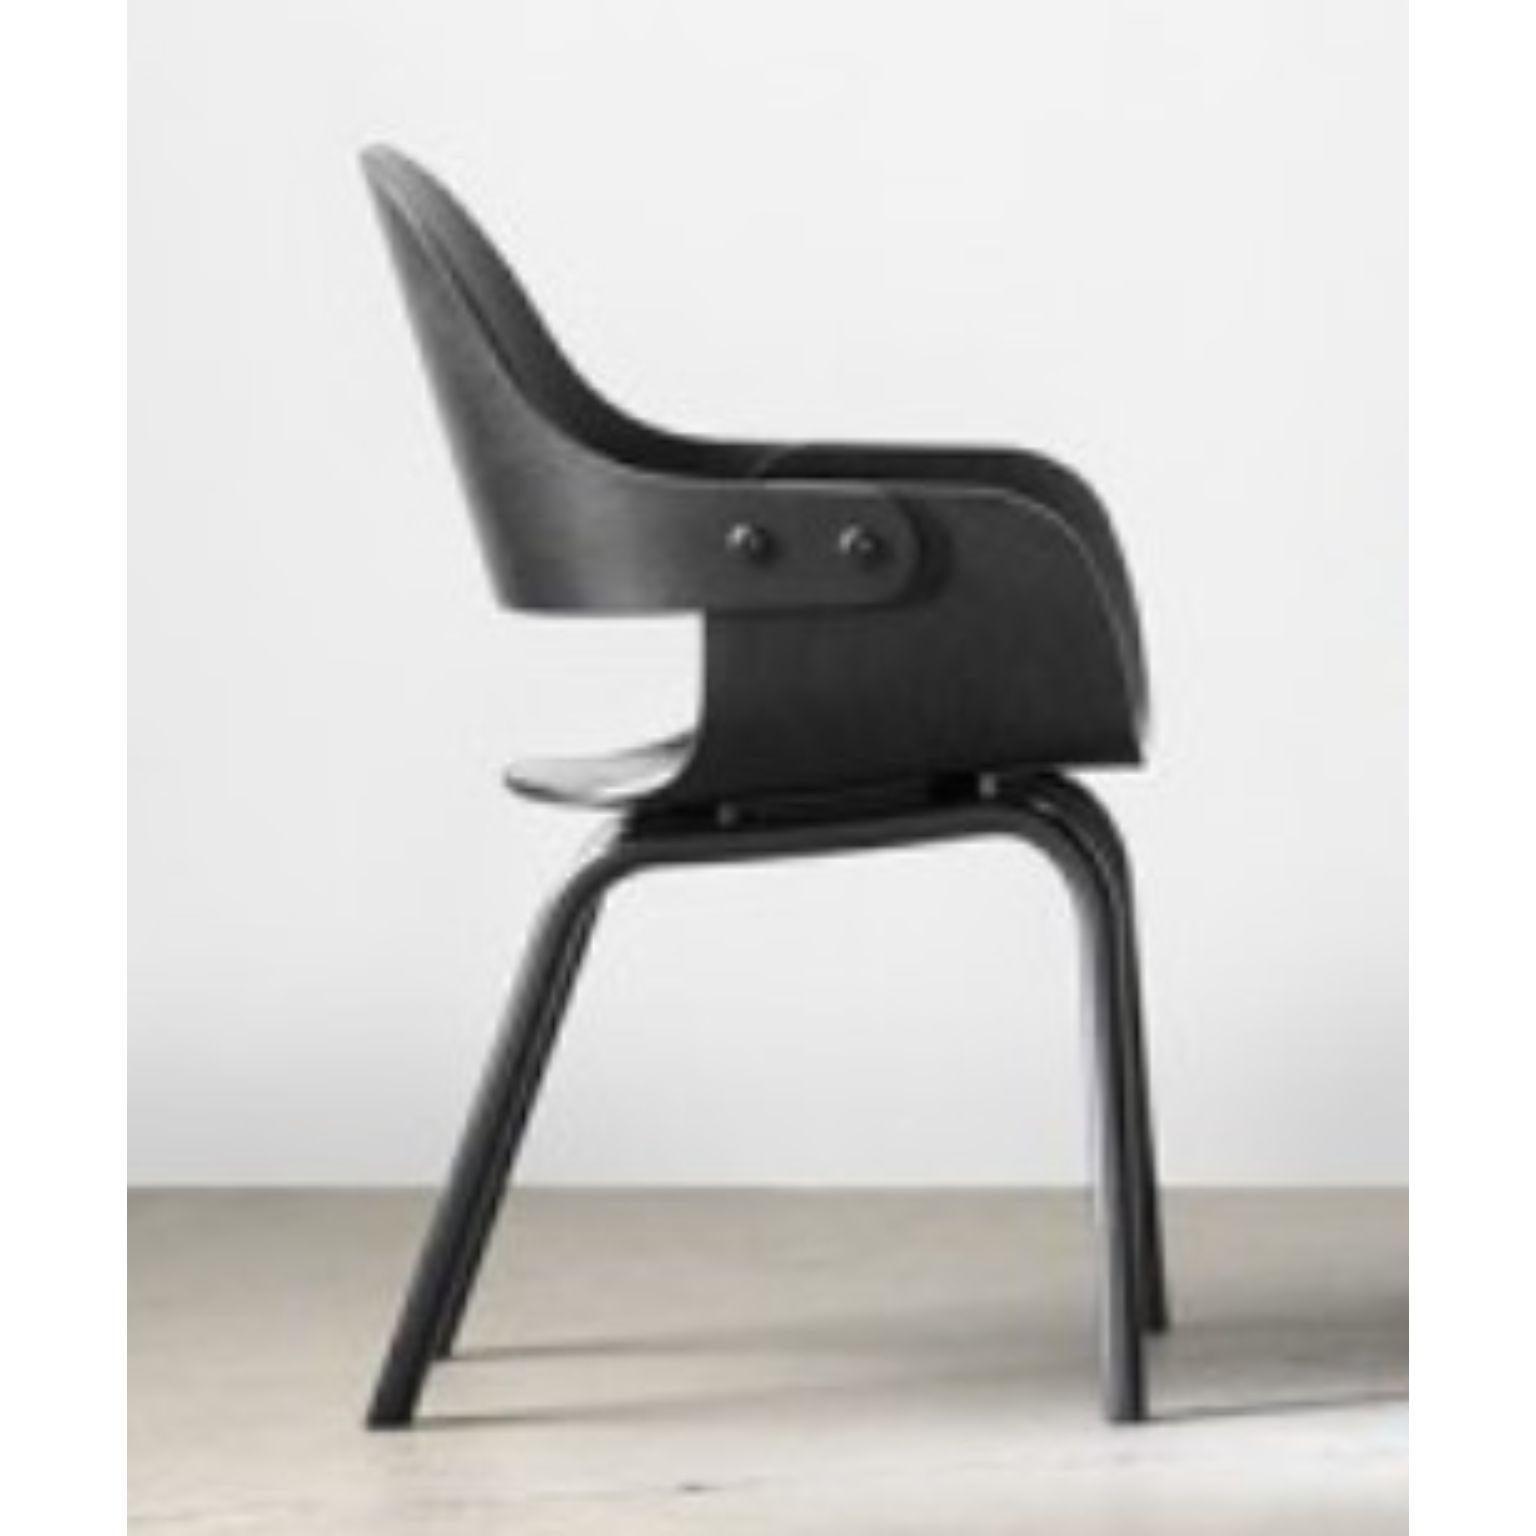 Showtime Nude 4 legs black chair by Jaime Hayon
Dimensions: D 55 x W 55 x H 86 cm 
Materials: powder-coated steel or aluminum structure. Legs, seat, and backrest in plywood with exteriors in natural ash, walnut, or ash stained black. Metallic